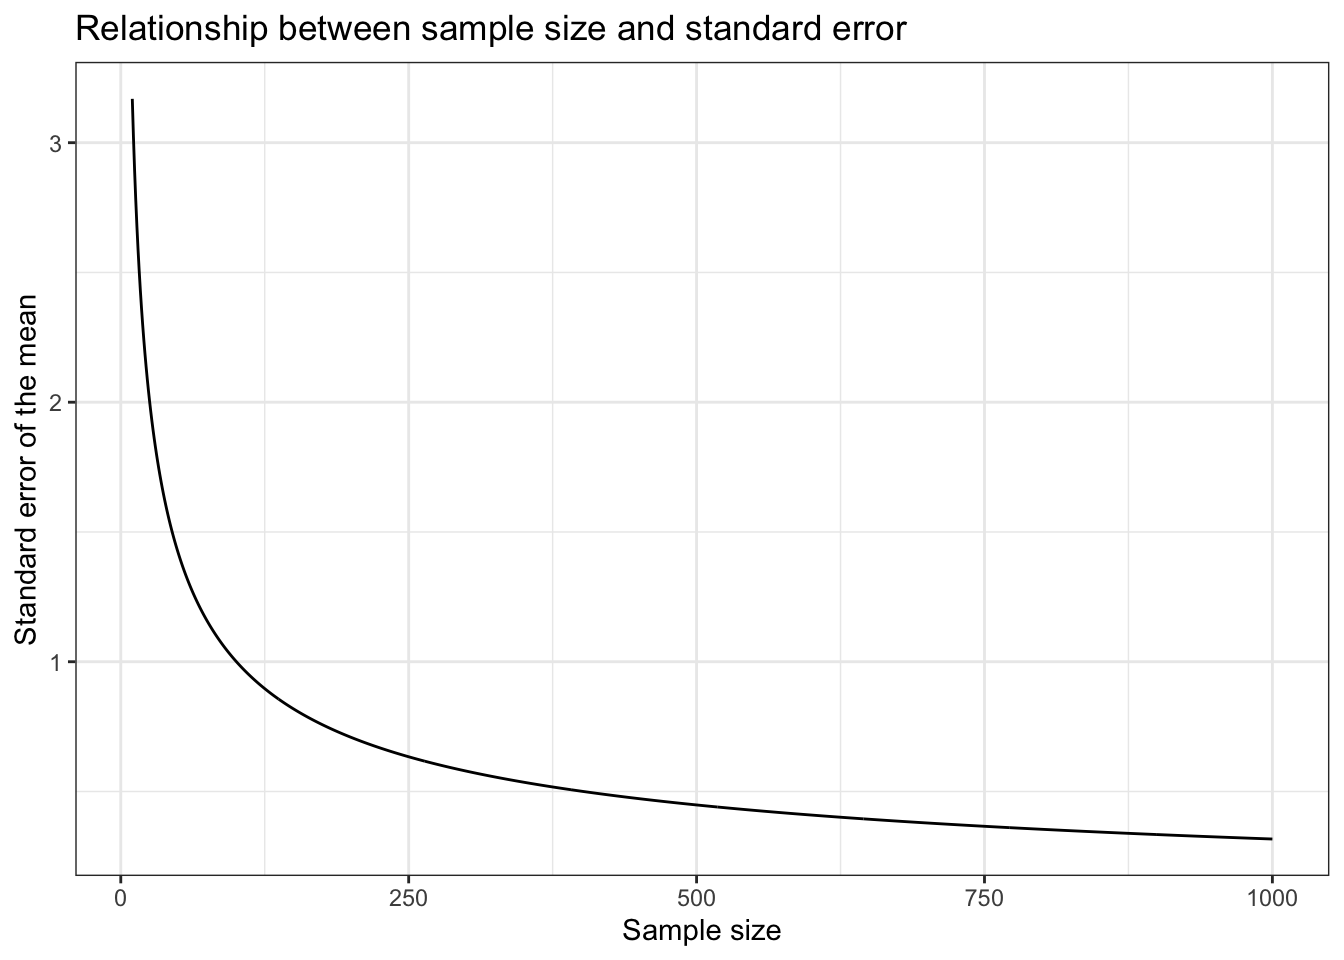 Relationship between the sample size and the standard error